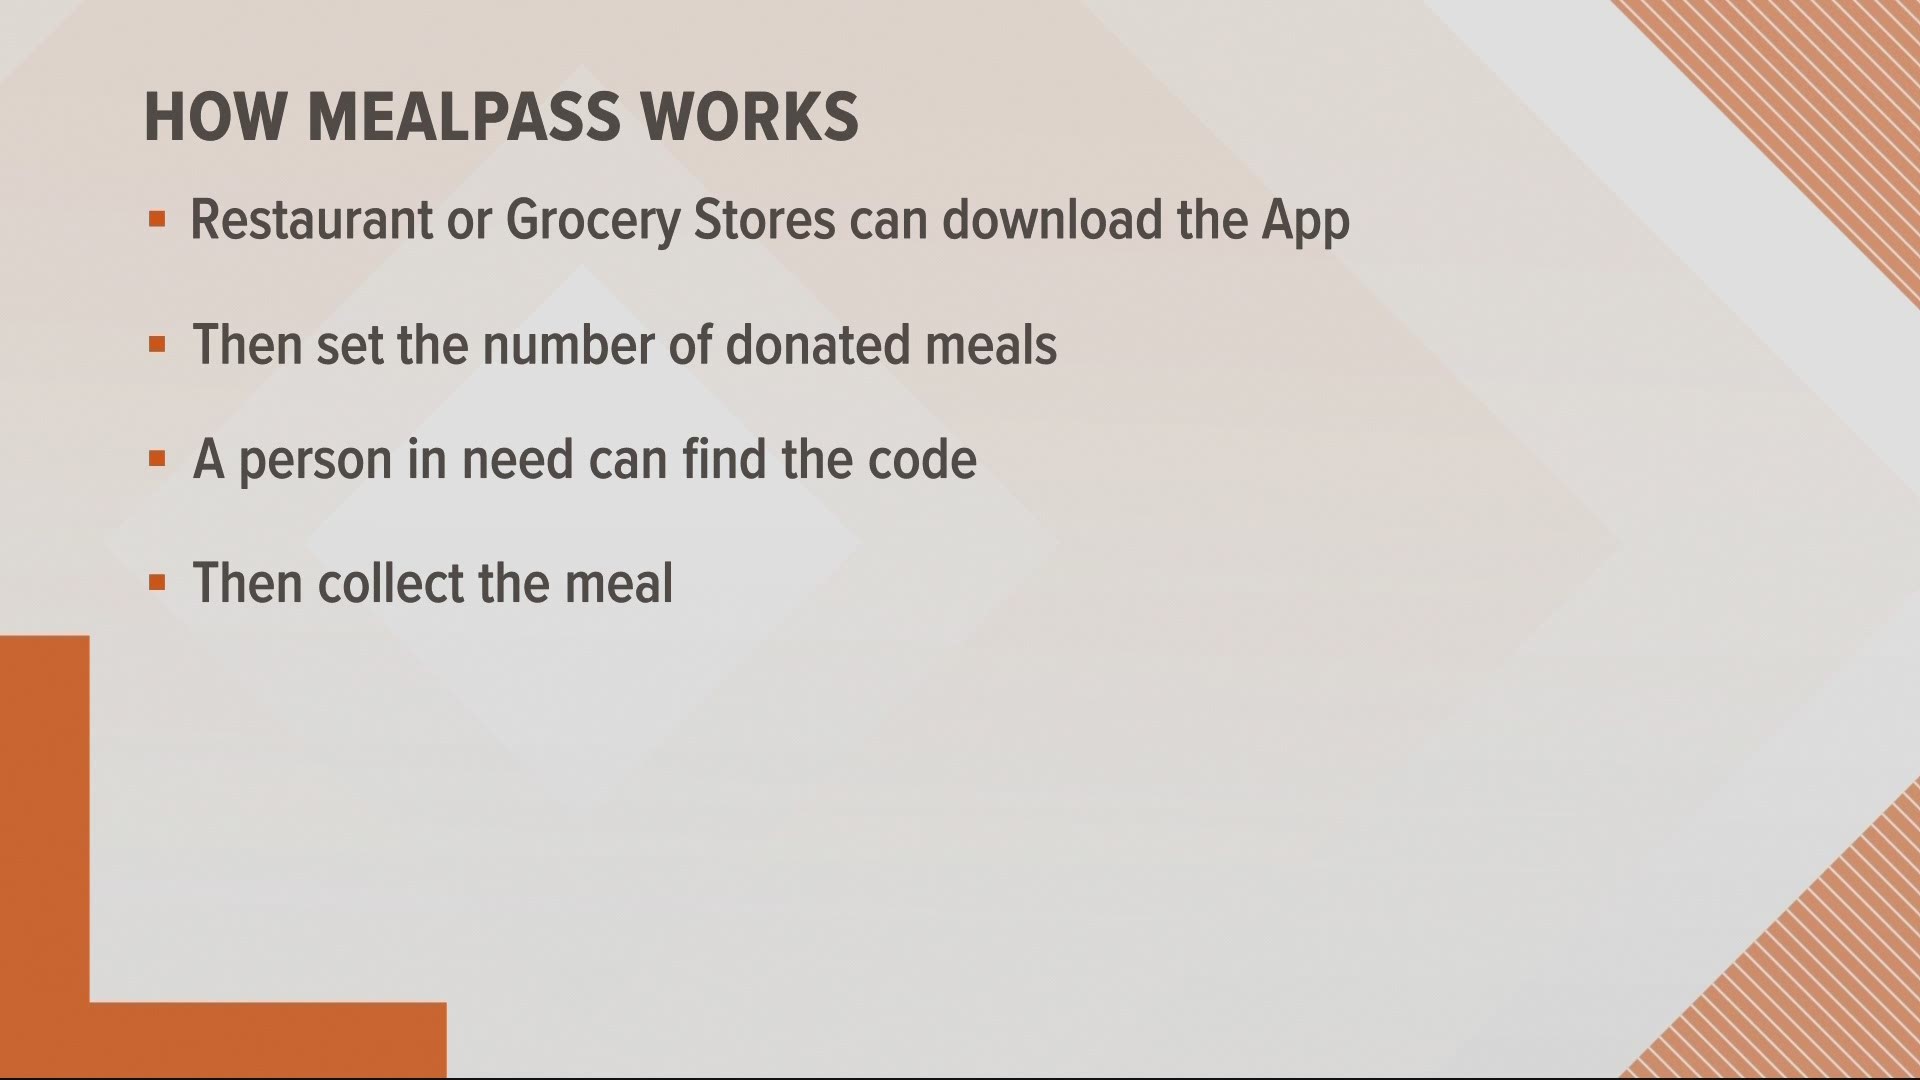 A new app to help people in need find free meals is being tested in Portland.